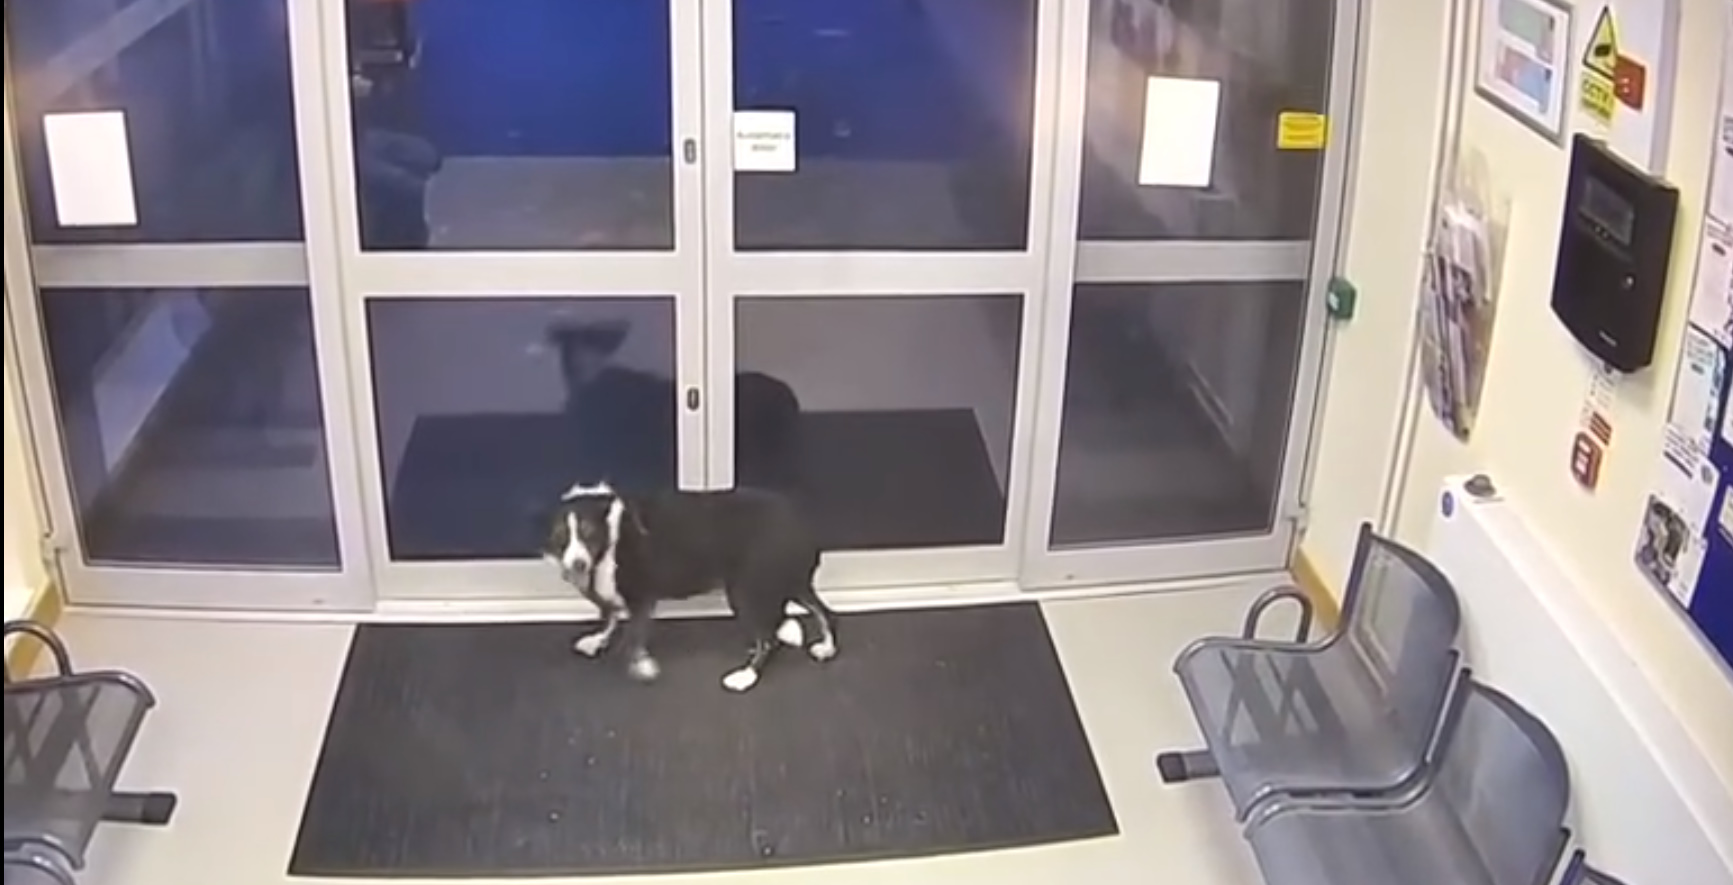 dog standing by the door of police station